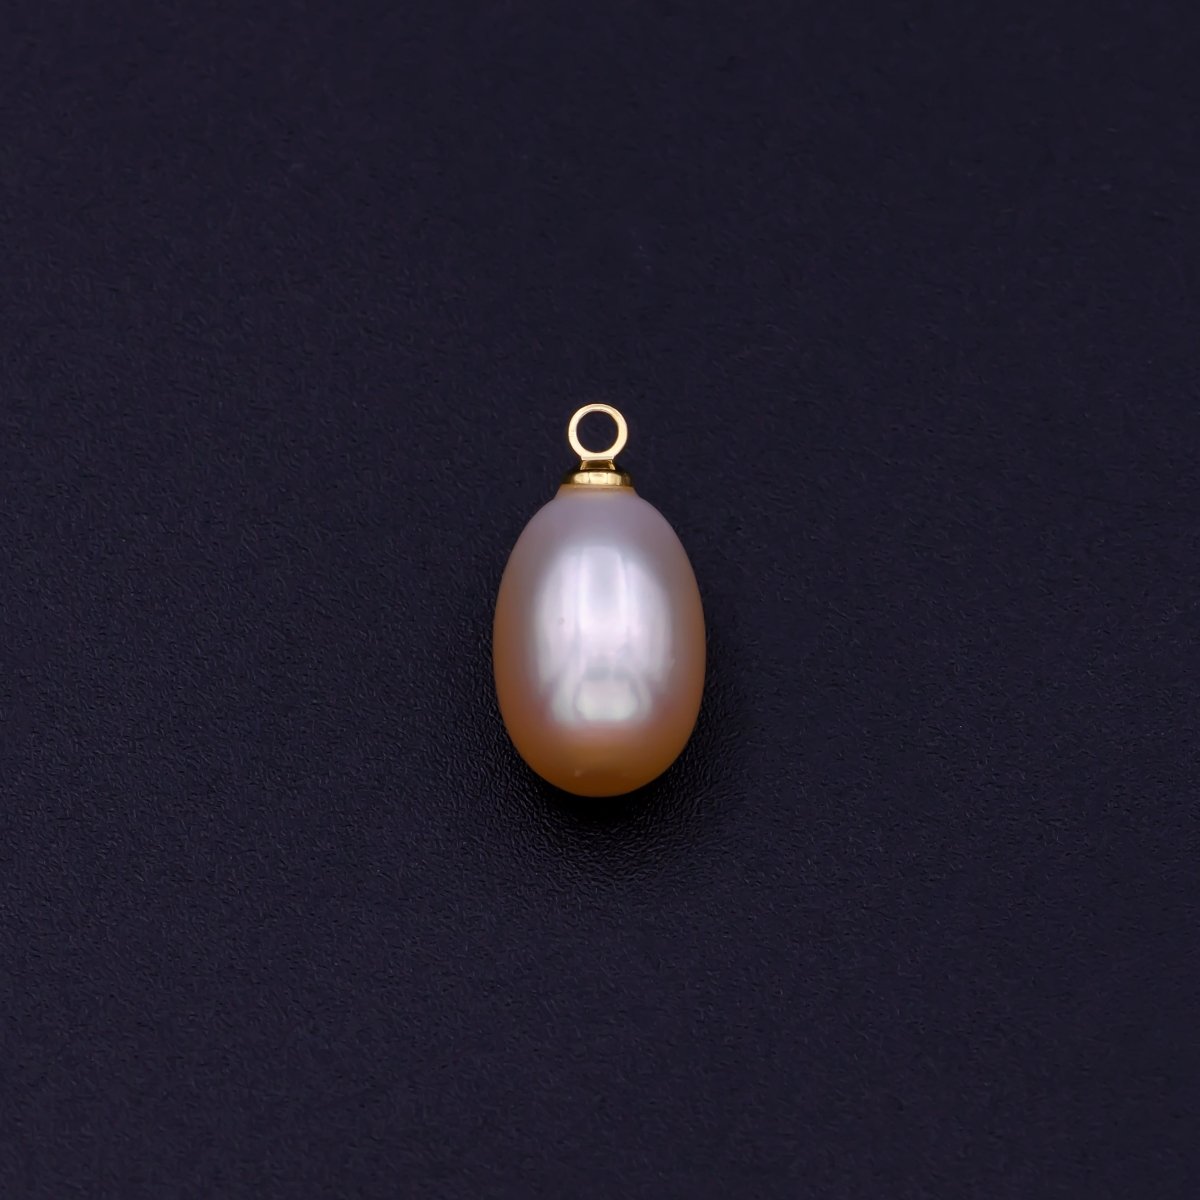 Natural Peach Teardrop Pearl Charm Natural Freshwater Pearl Necklace, Mauve Champagne Peach Single Keshi Pendant, Bridesmaid Jewelry Gift P-1593 - DLUXCA